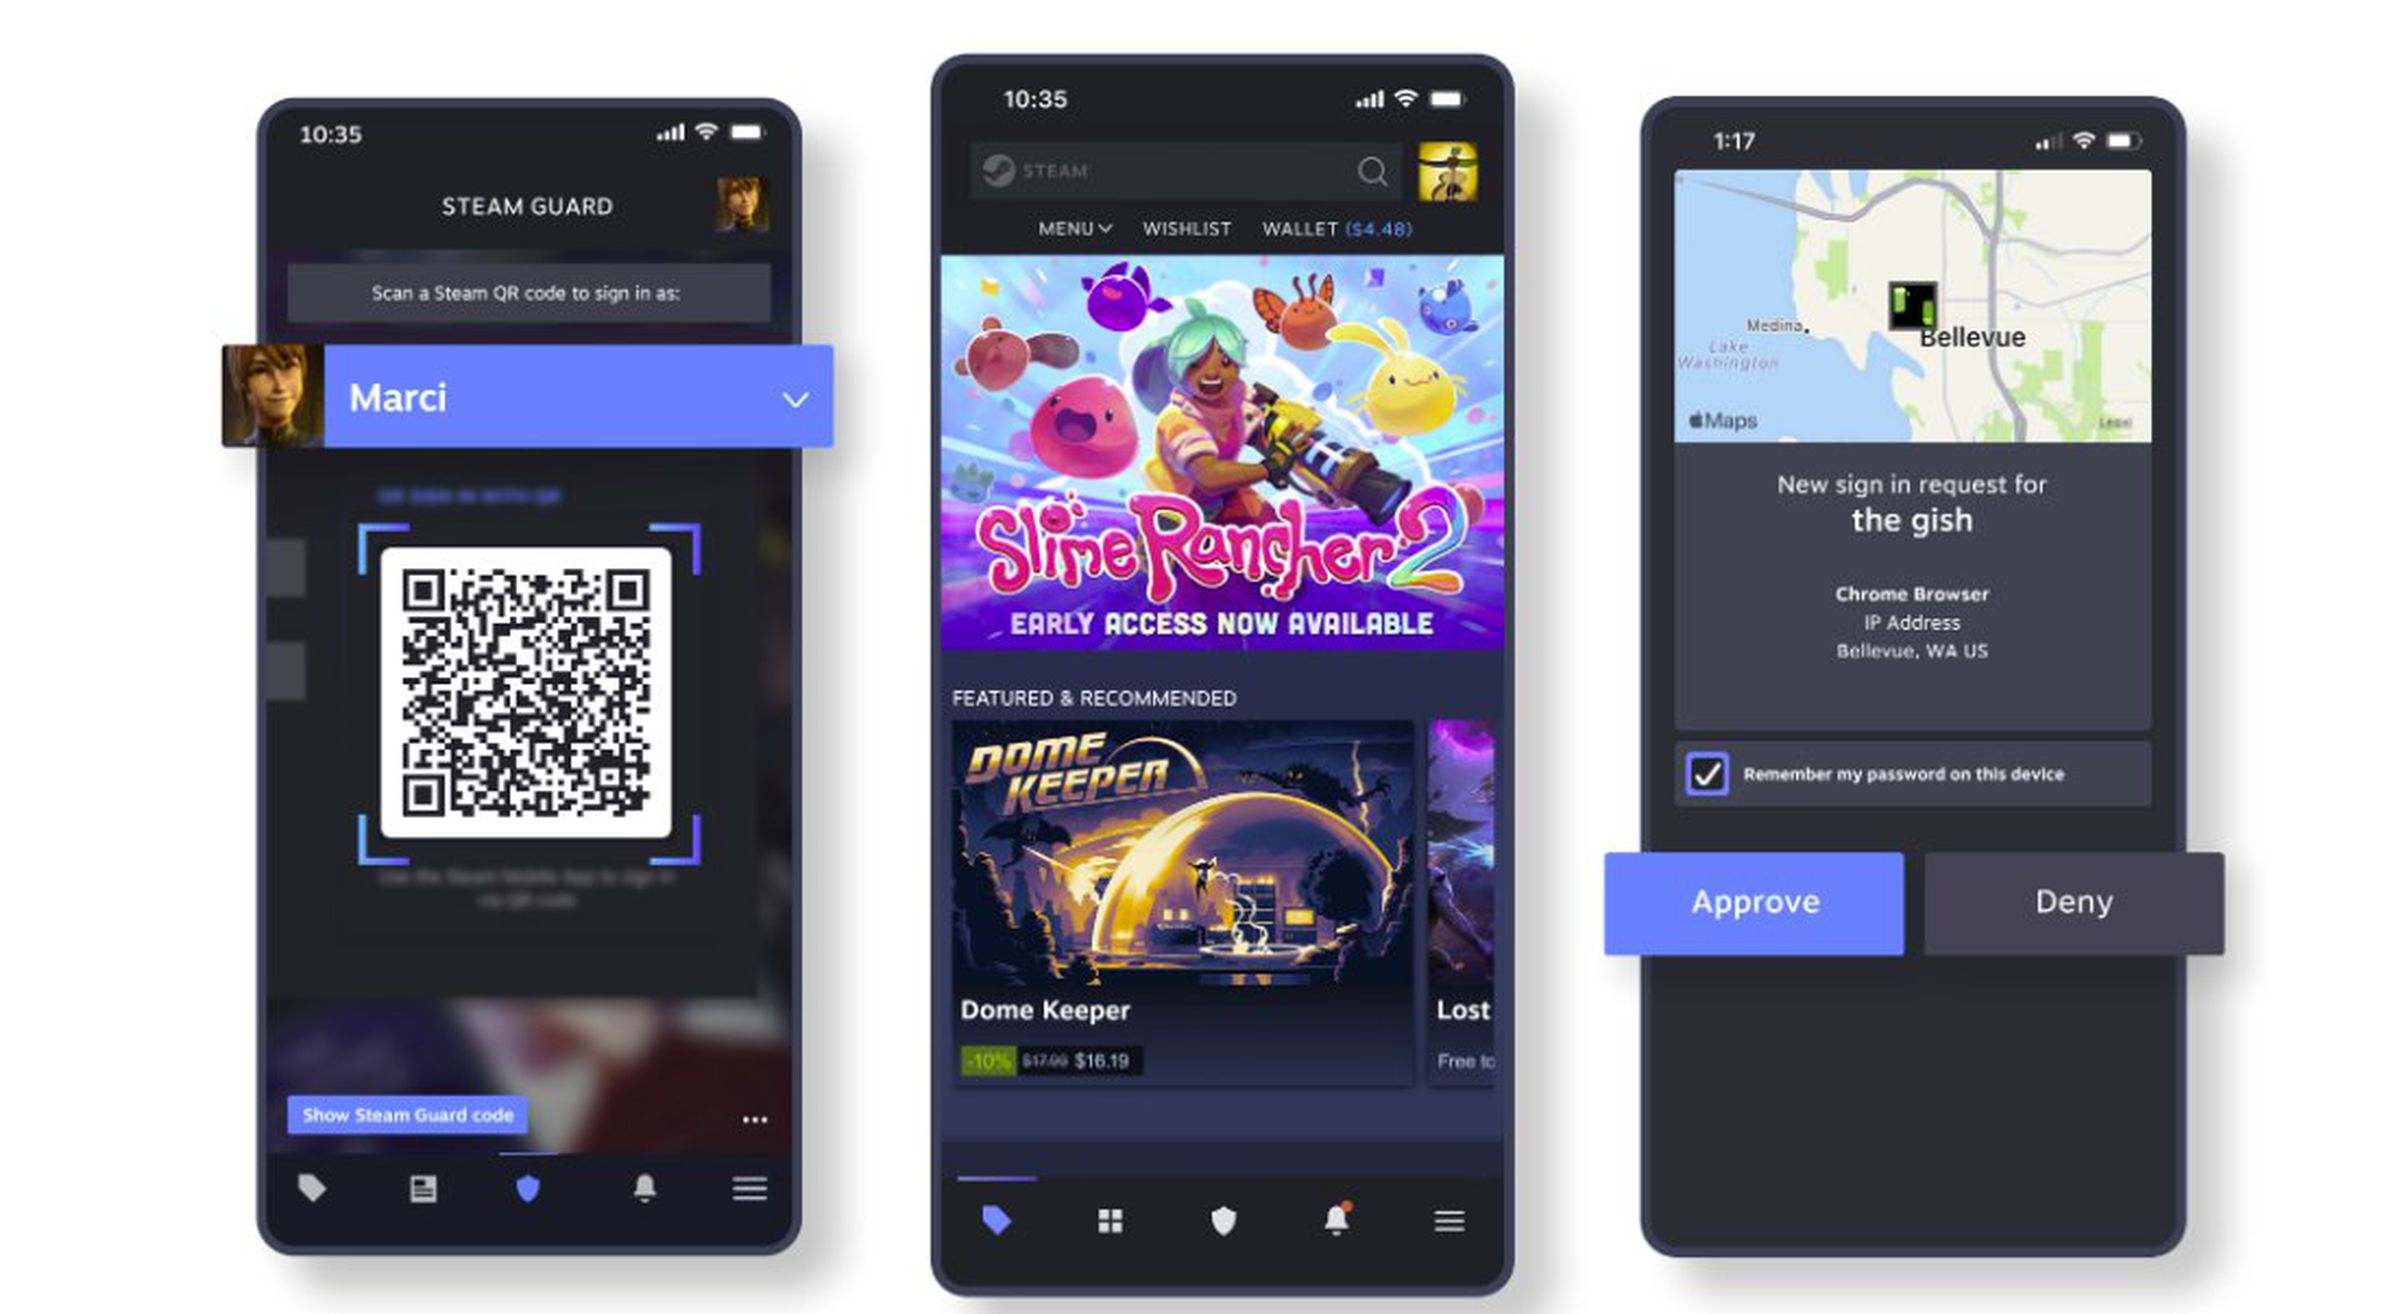 Three simulated phone images showing the Steam Mobile app, a QR code for logging in, and the prompt that appears to approve a sign-in request with the option to approve or deny.